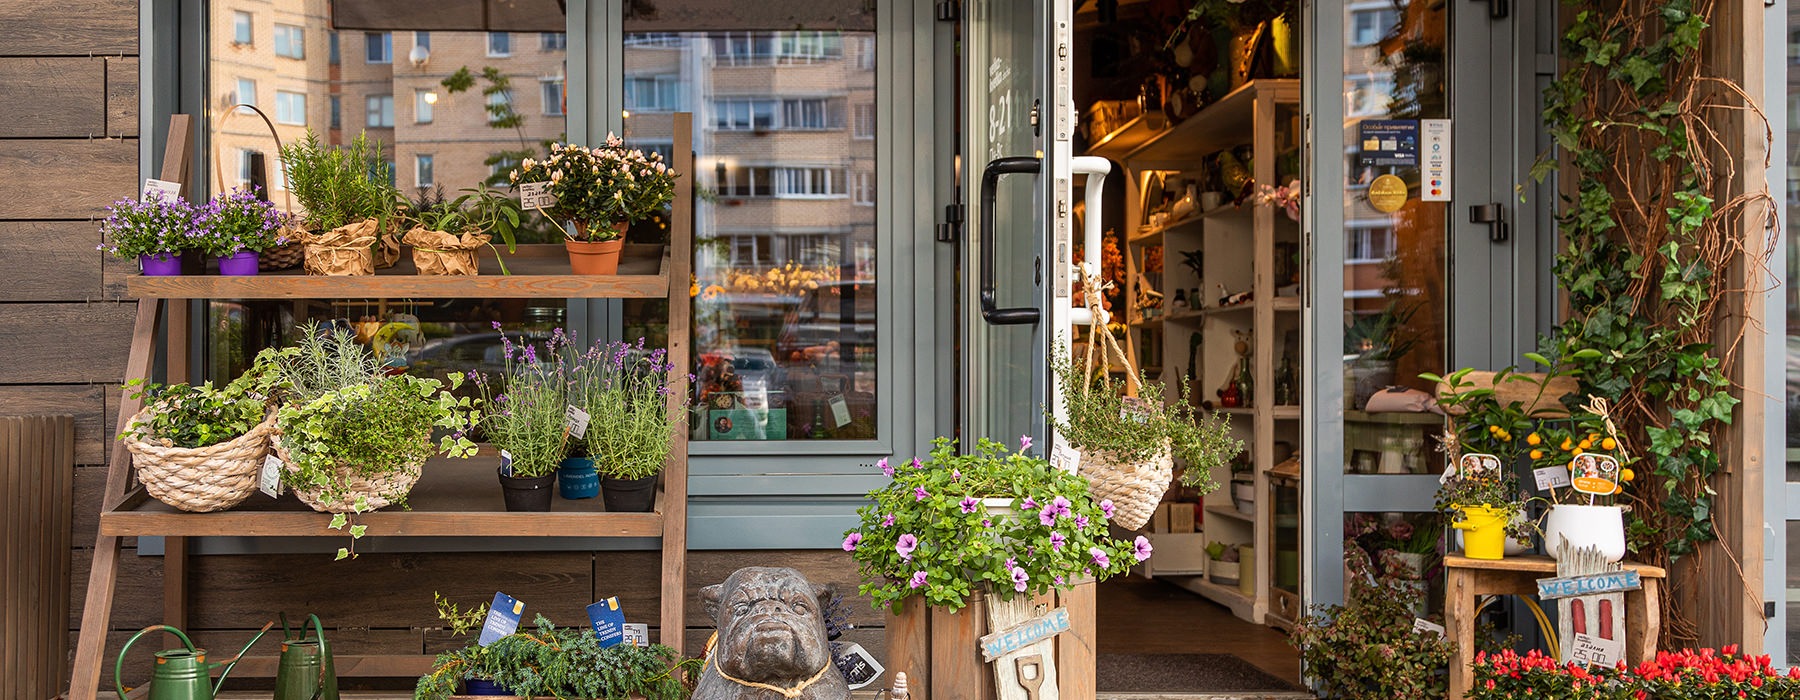 plant store front with plants on display